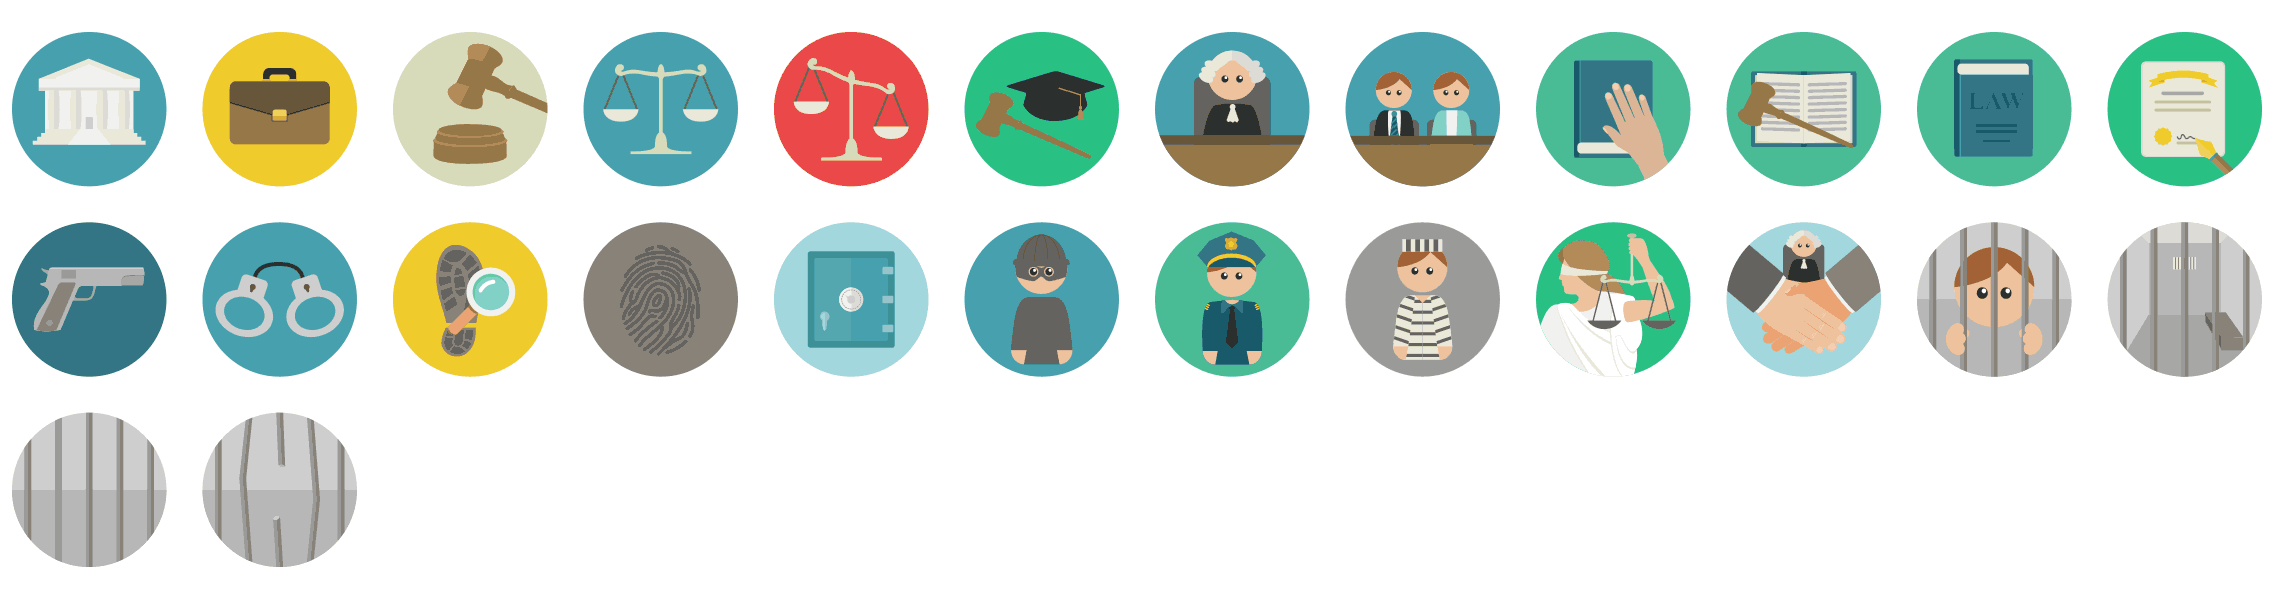 law-flat-icons-vol-1-preview